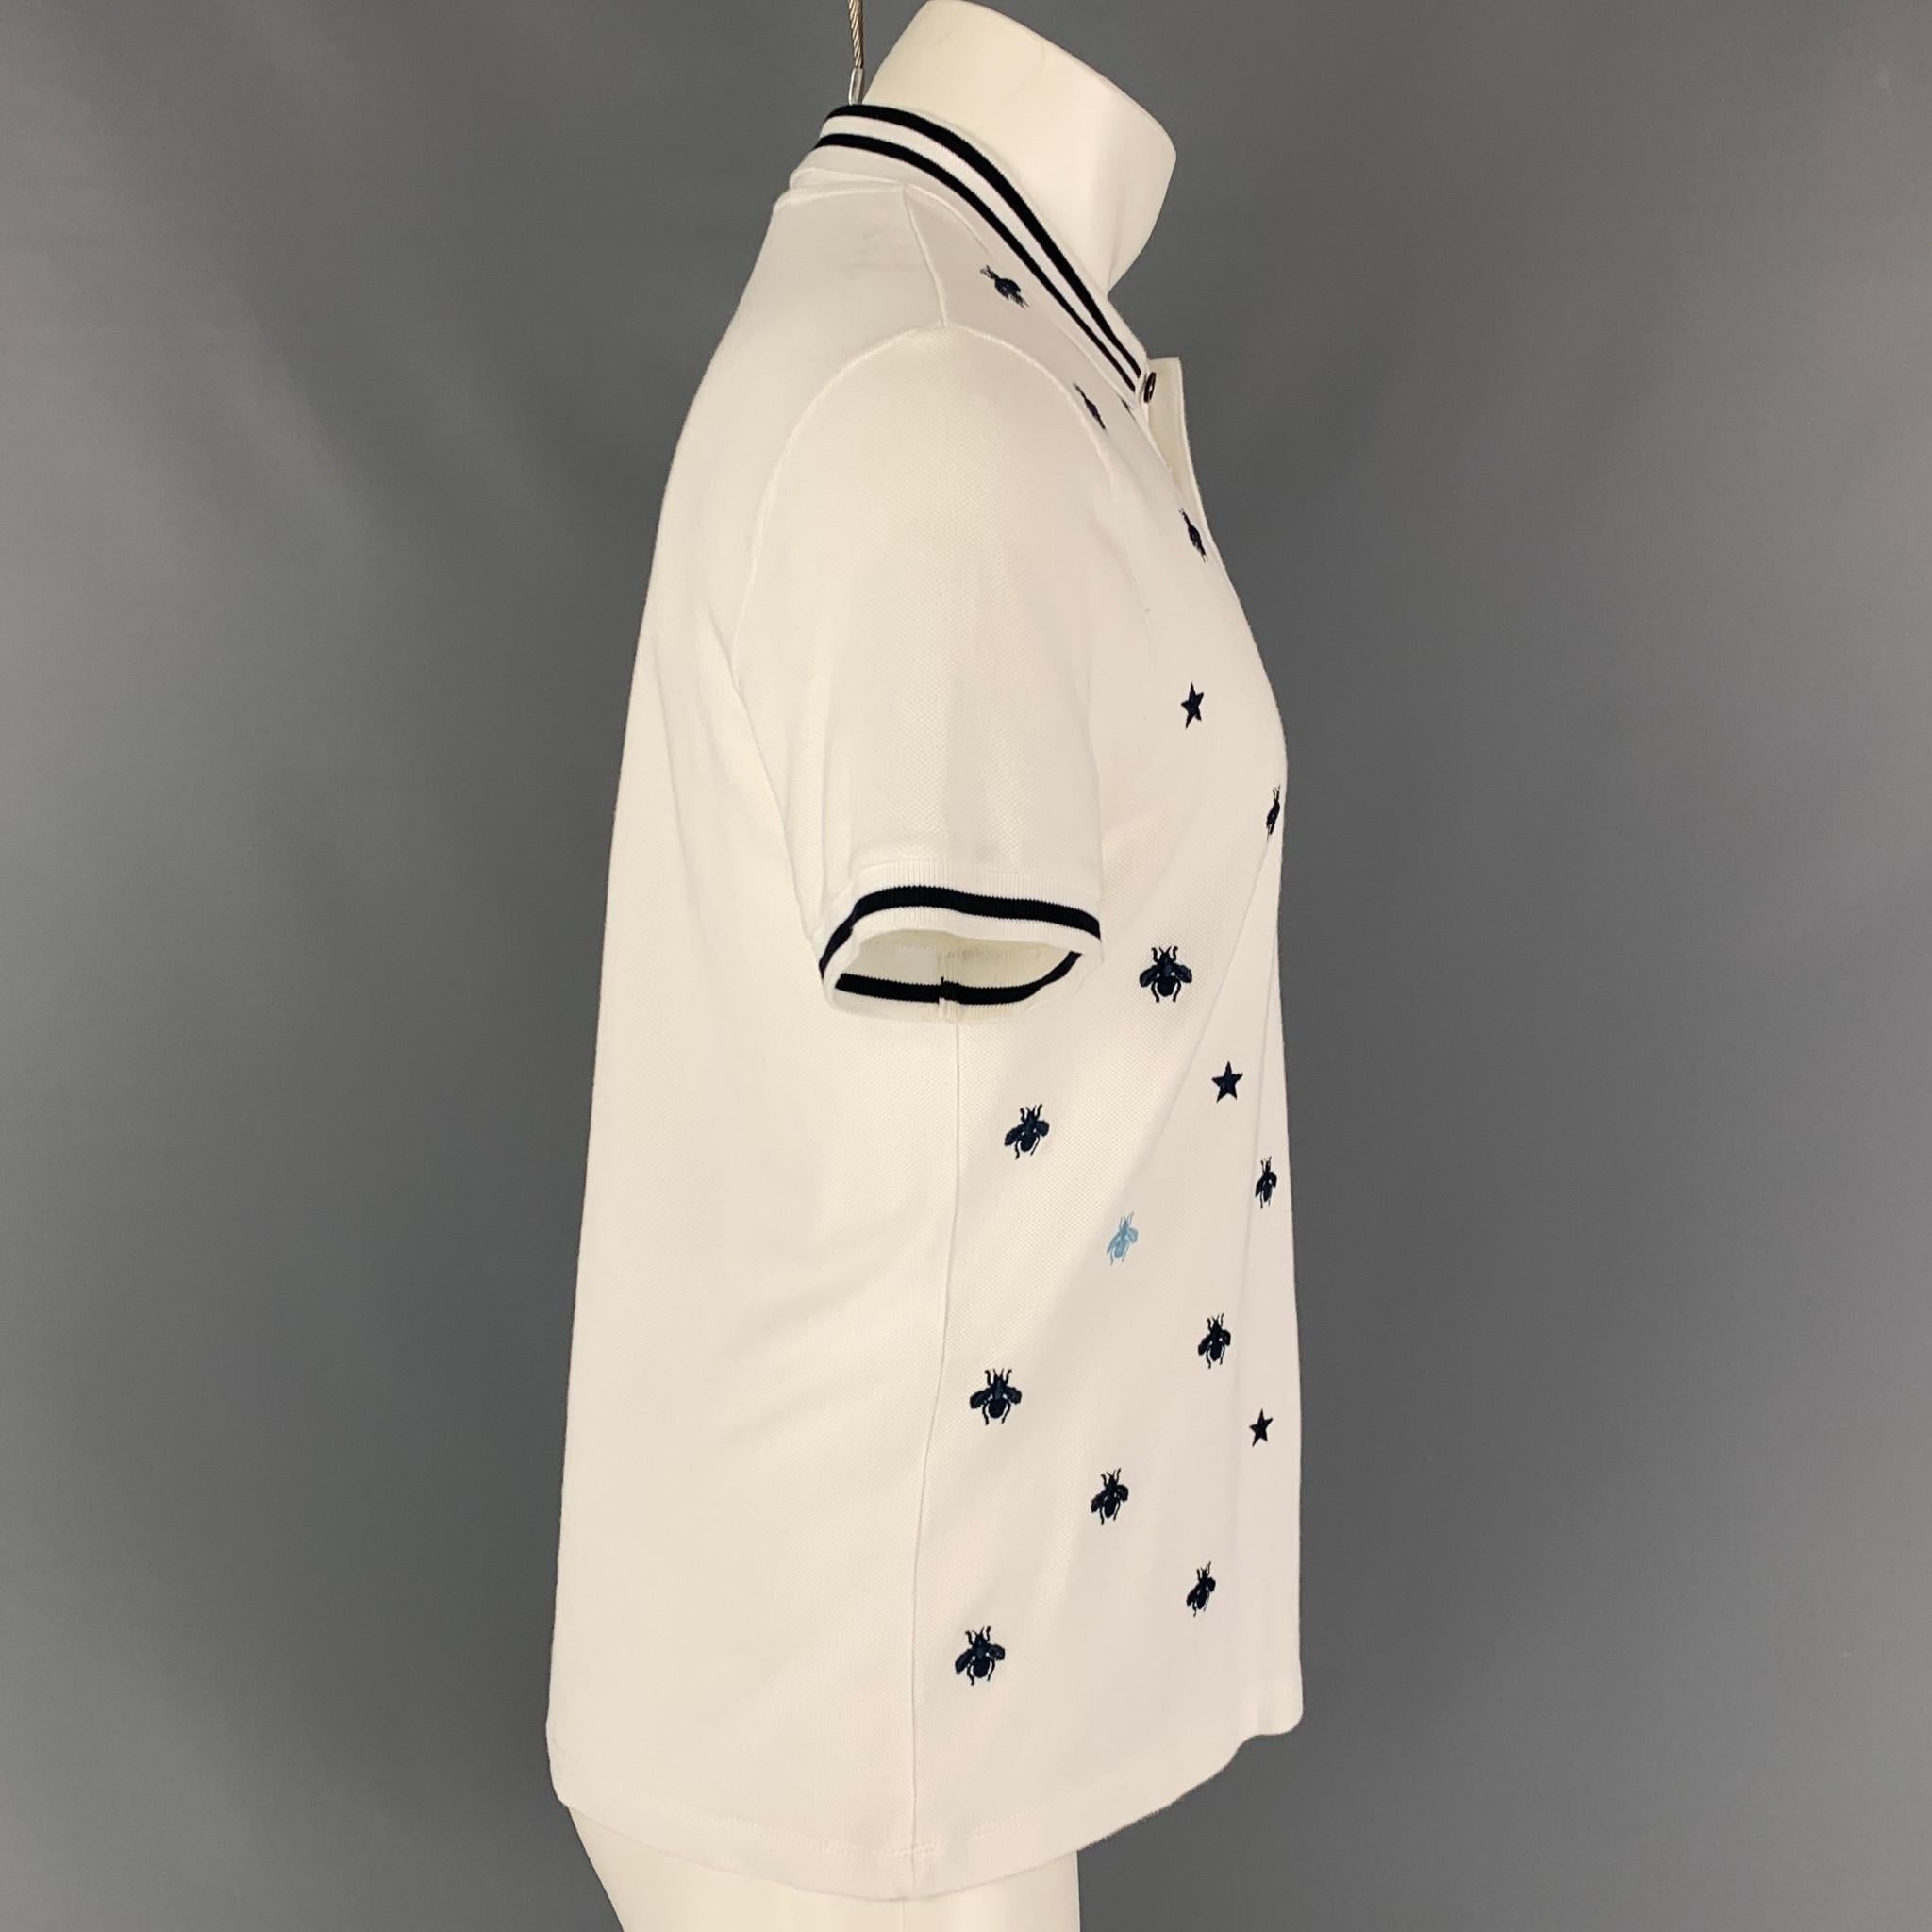 GUCCI polo comes in a white & navy material with a 'Bees & Stars' embroidered design featuring a stripe trim and a buttoned closure. Made in Italy. 

Good Pre-Owned Condition. Minor marks at sleeve.
Marked: Size tag removed.
Original Retail Price: